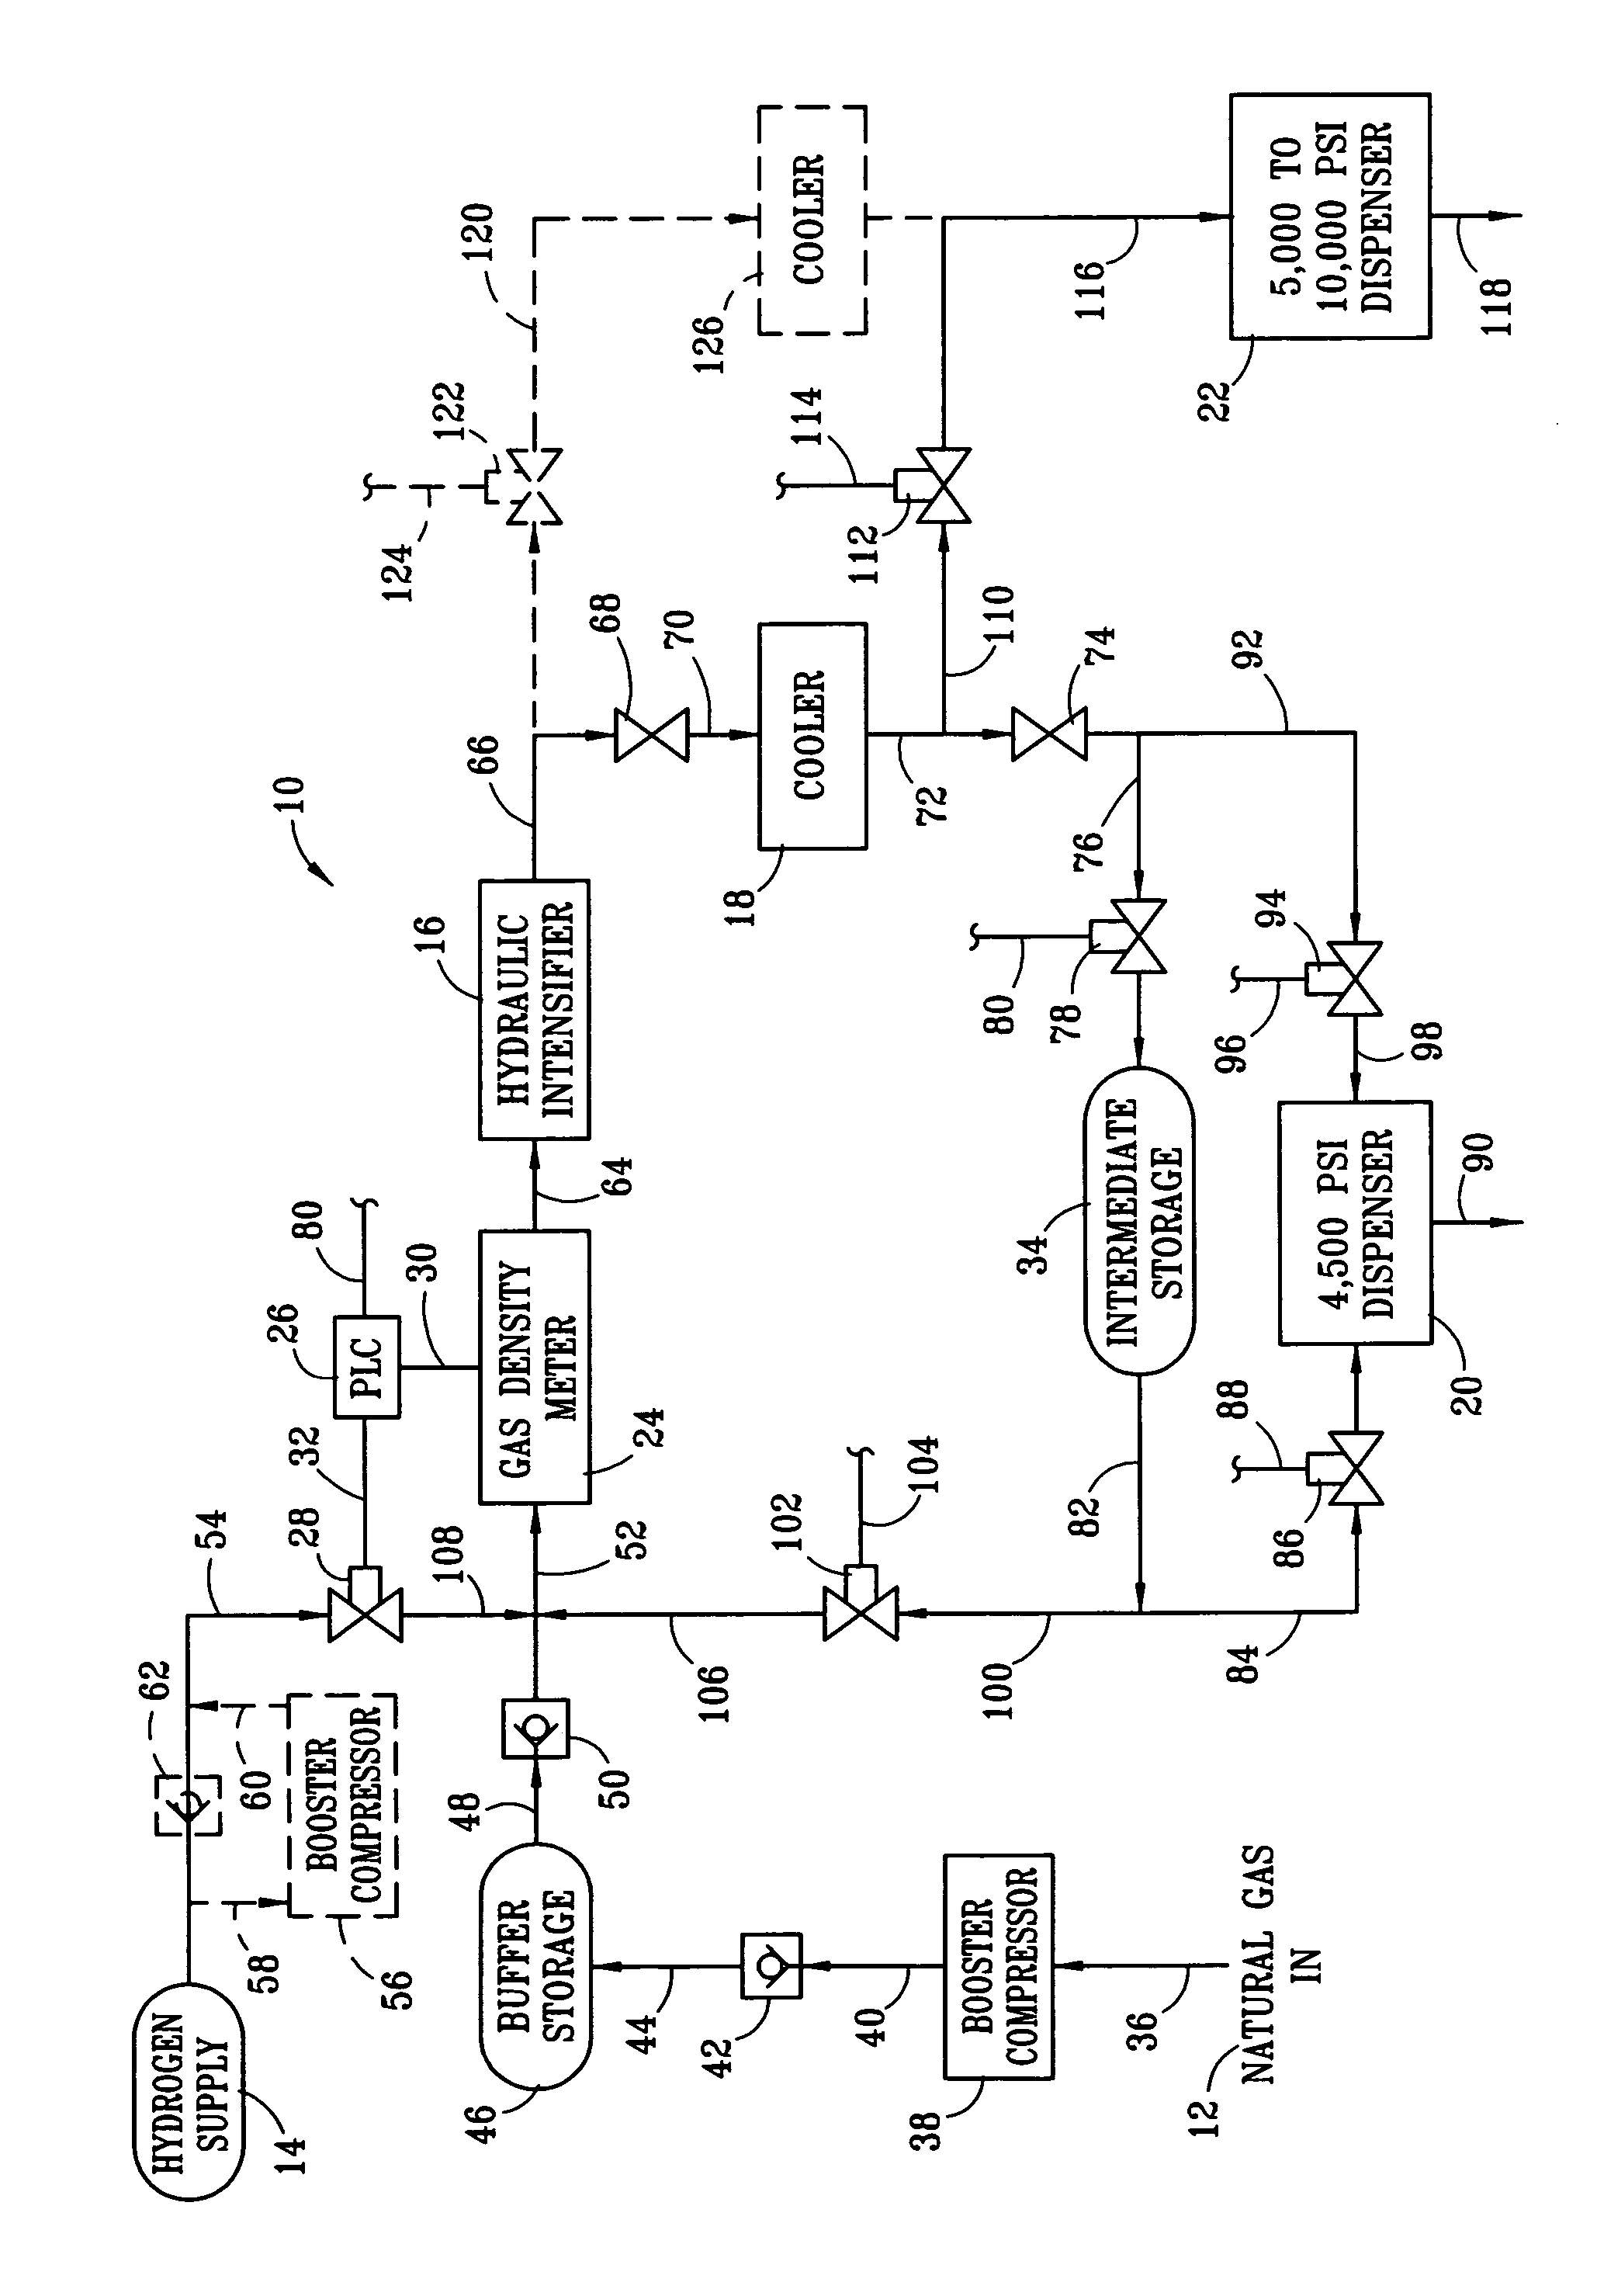 Dual-service system and method for compressing and dispensing natural gas and hydrogen